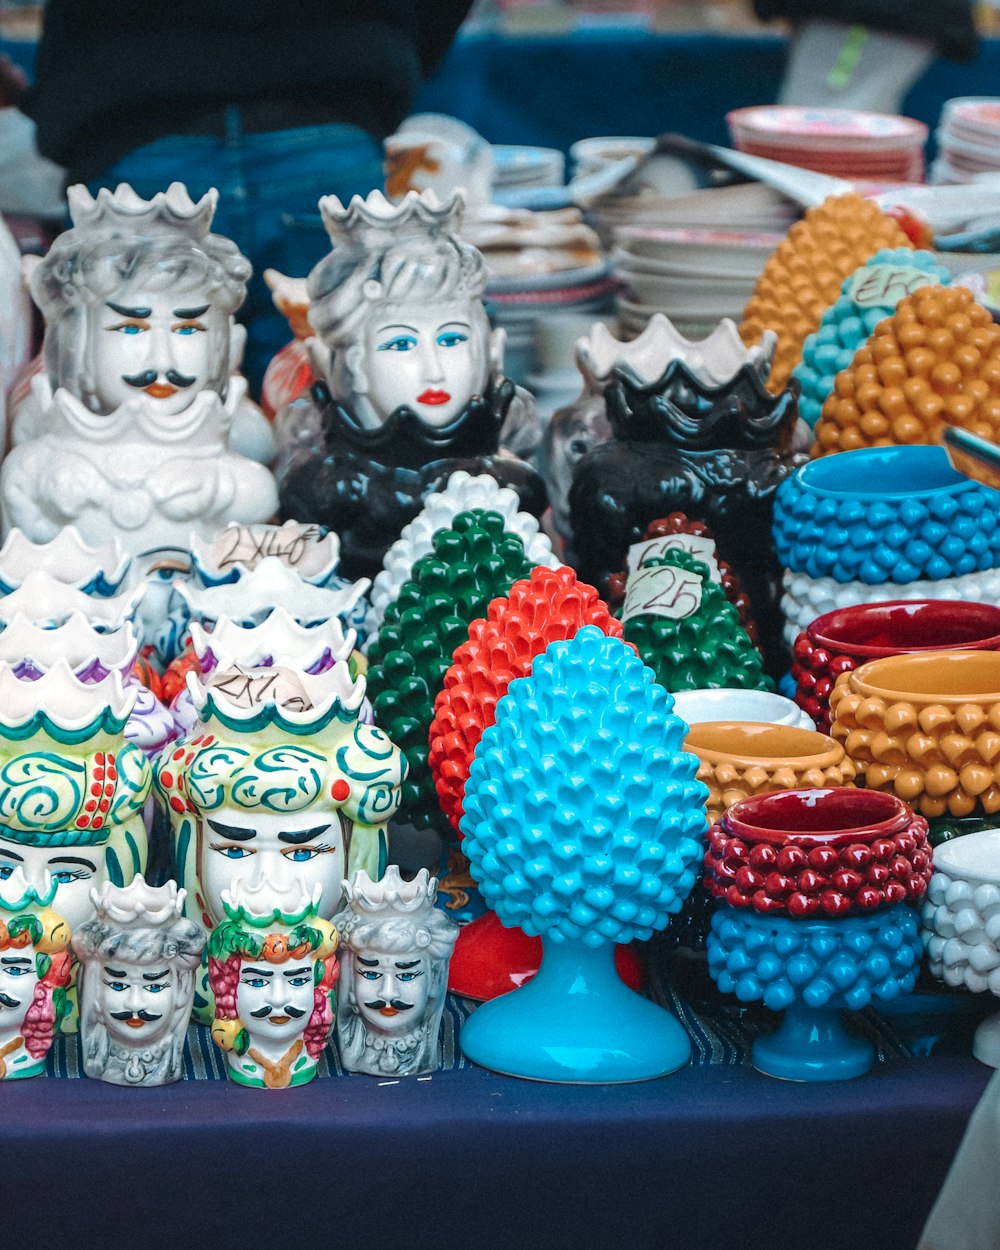 a table topped with lots of colorful ceramic figurines